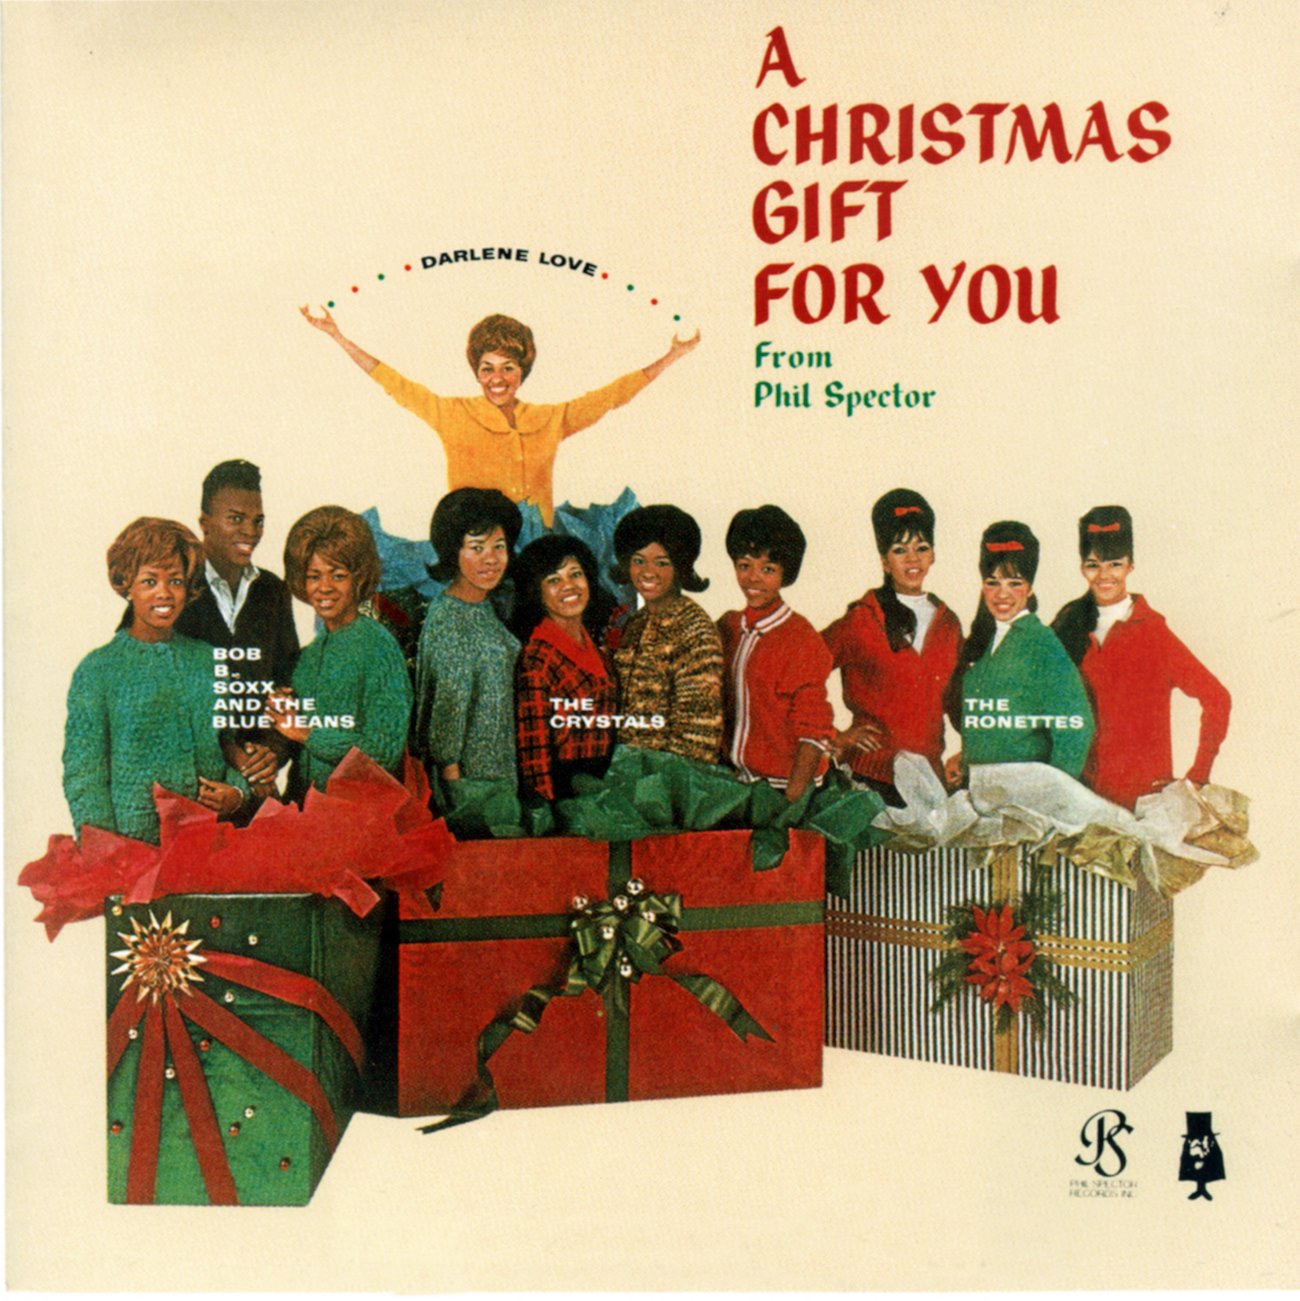 'A Christmas Gift For You' From Phil Spector album cover in 1963.
